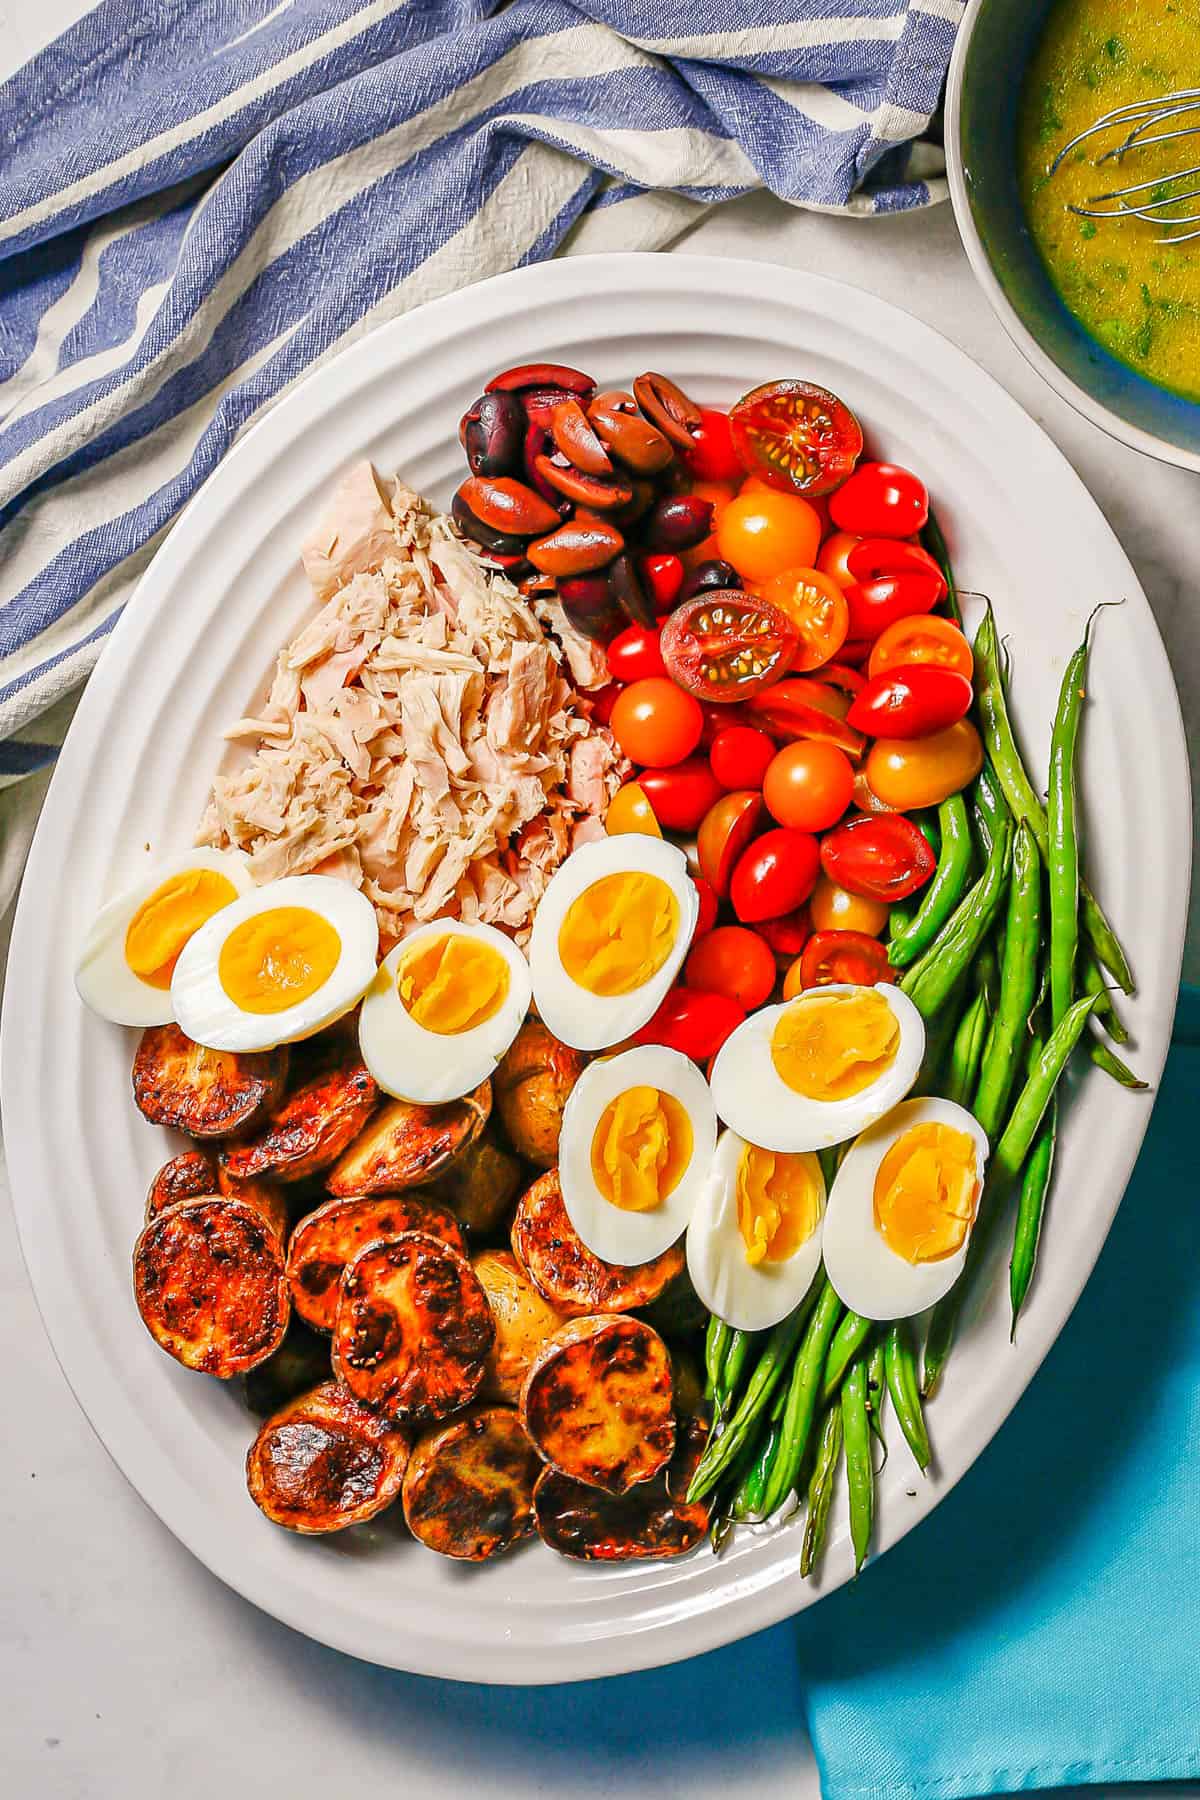 Tuna Niçoise salad with roasted potatoes and green beans, hard boiled eggs, colorful tomatoes and olives on a white platter with a lemony vinaigrette to the side.